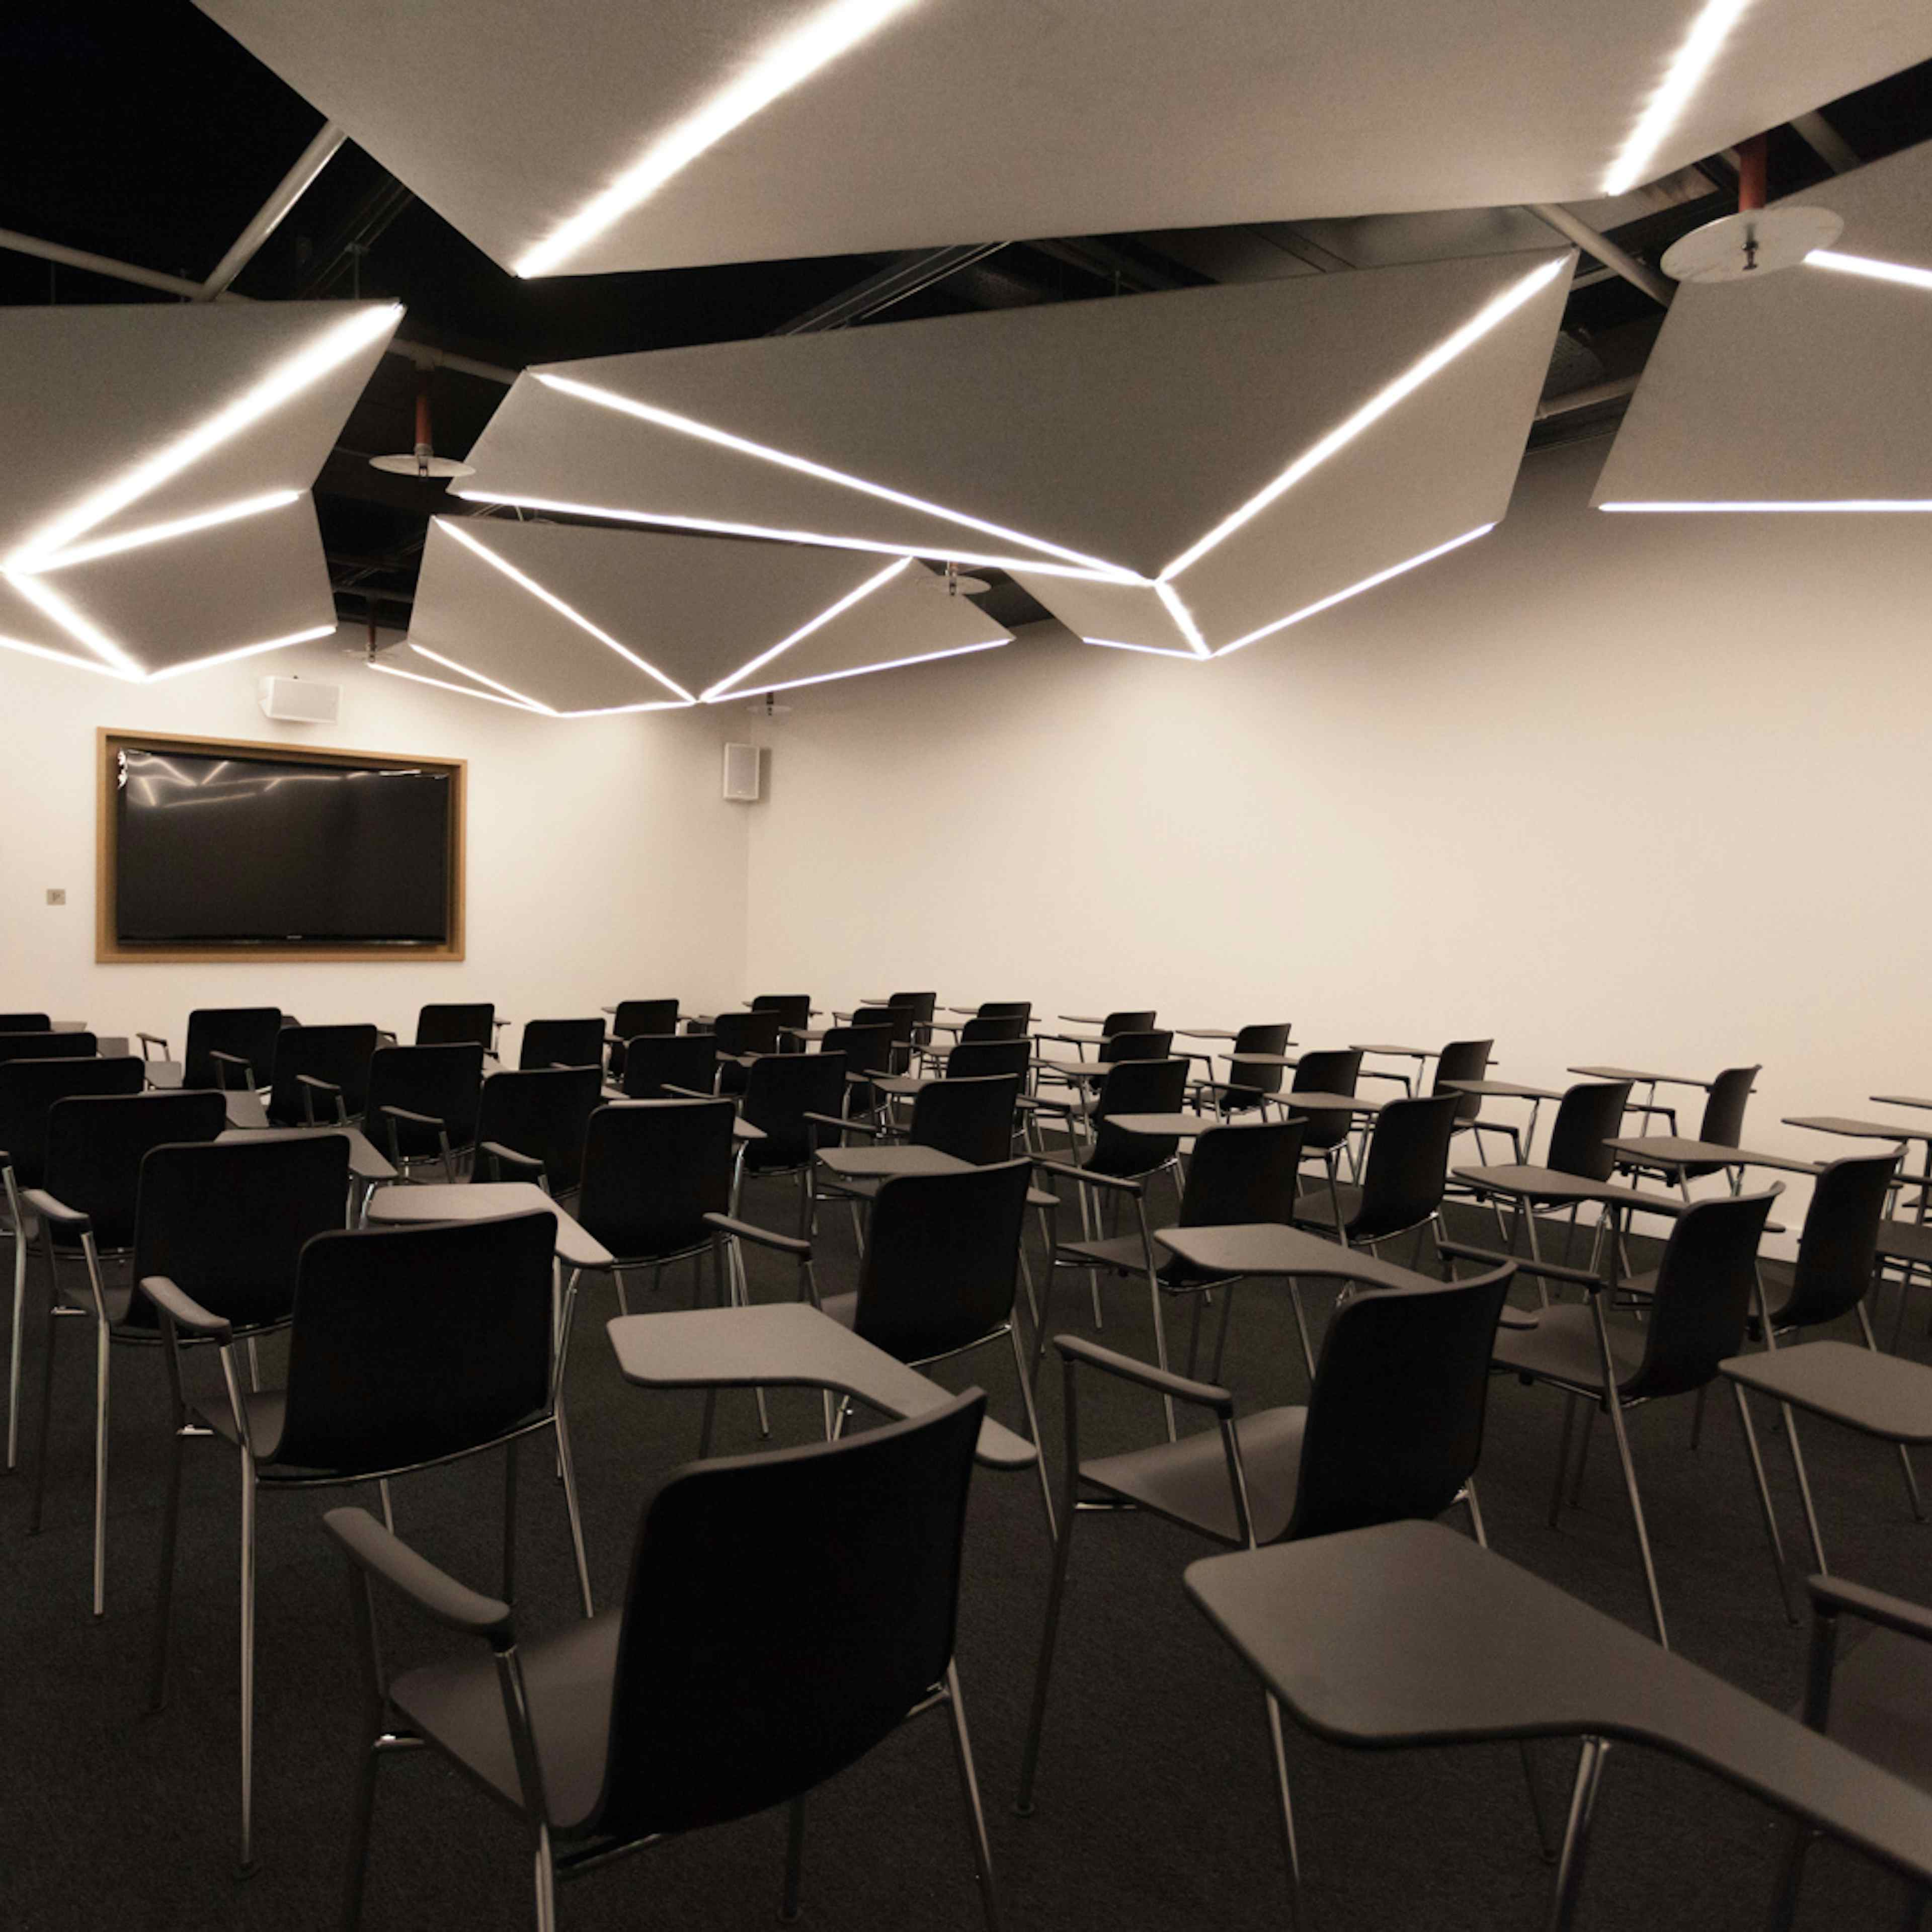 Huckletree Shoreditch - The Classroom Meeting / Event Space image 2